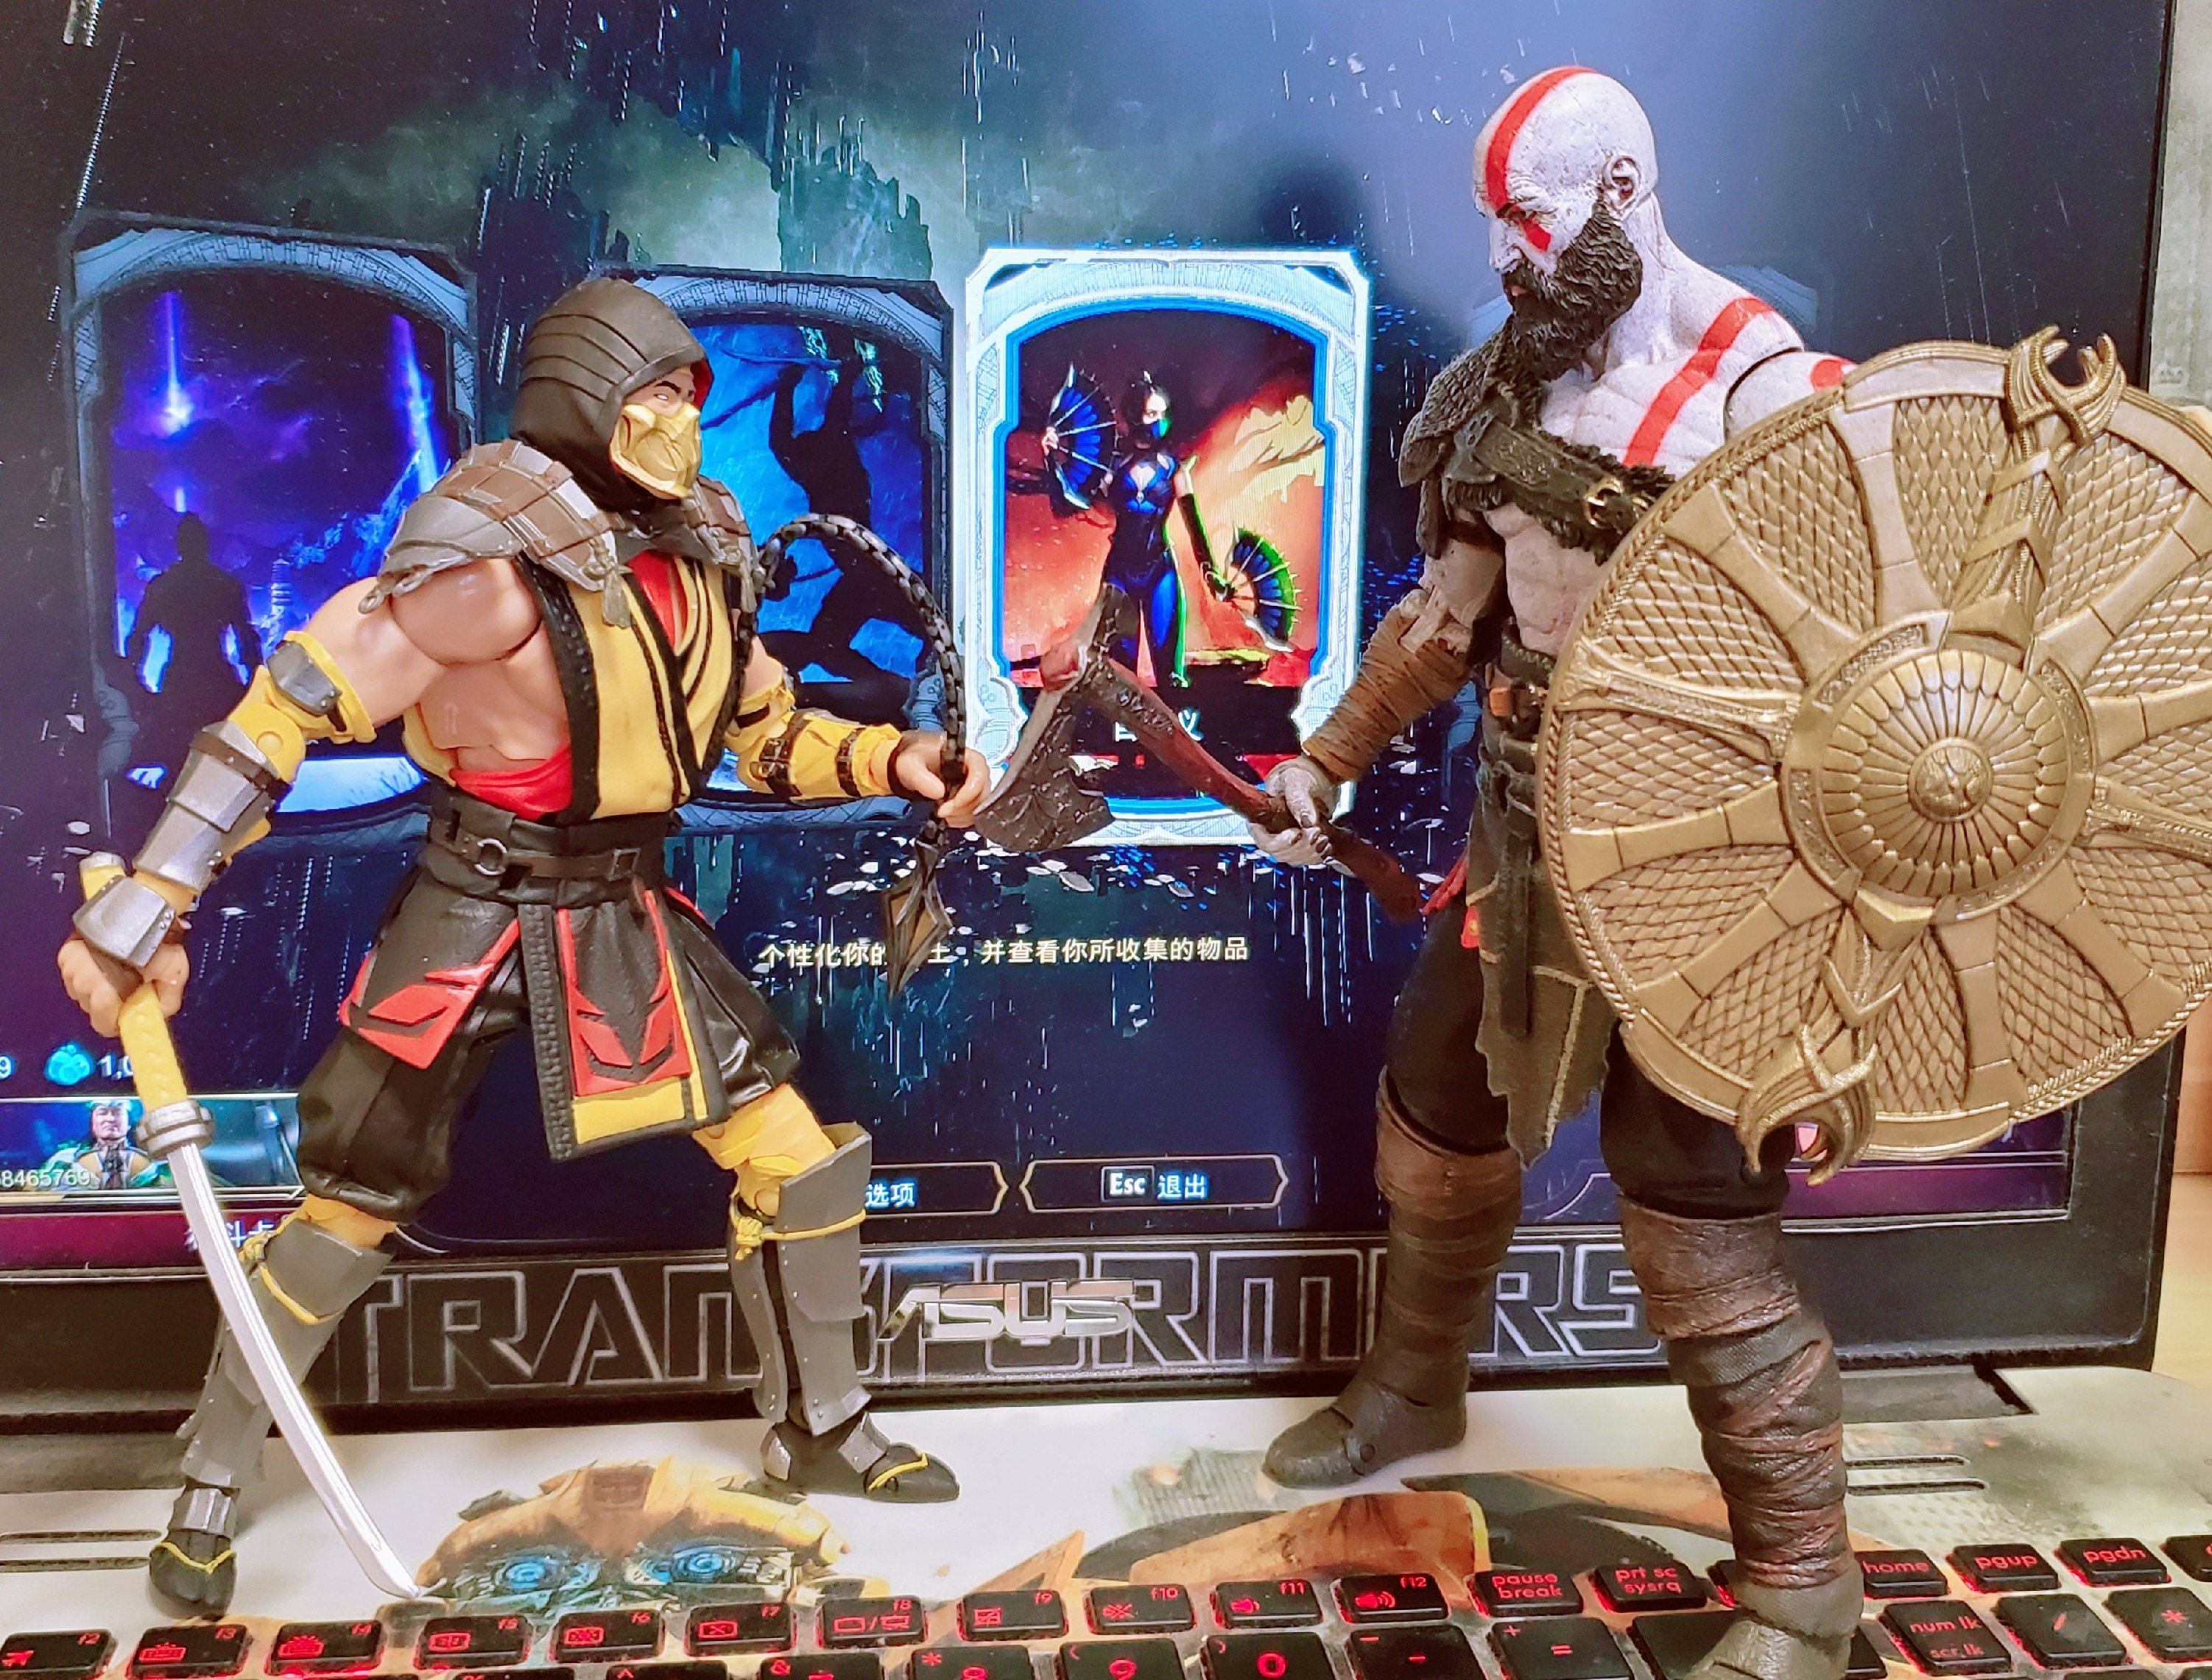 danielboy on X: Is this the official size comparison of kratos